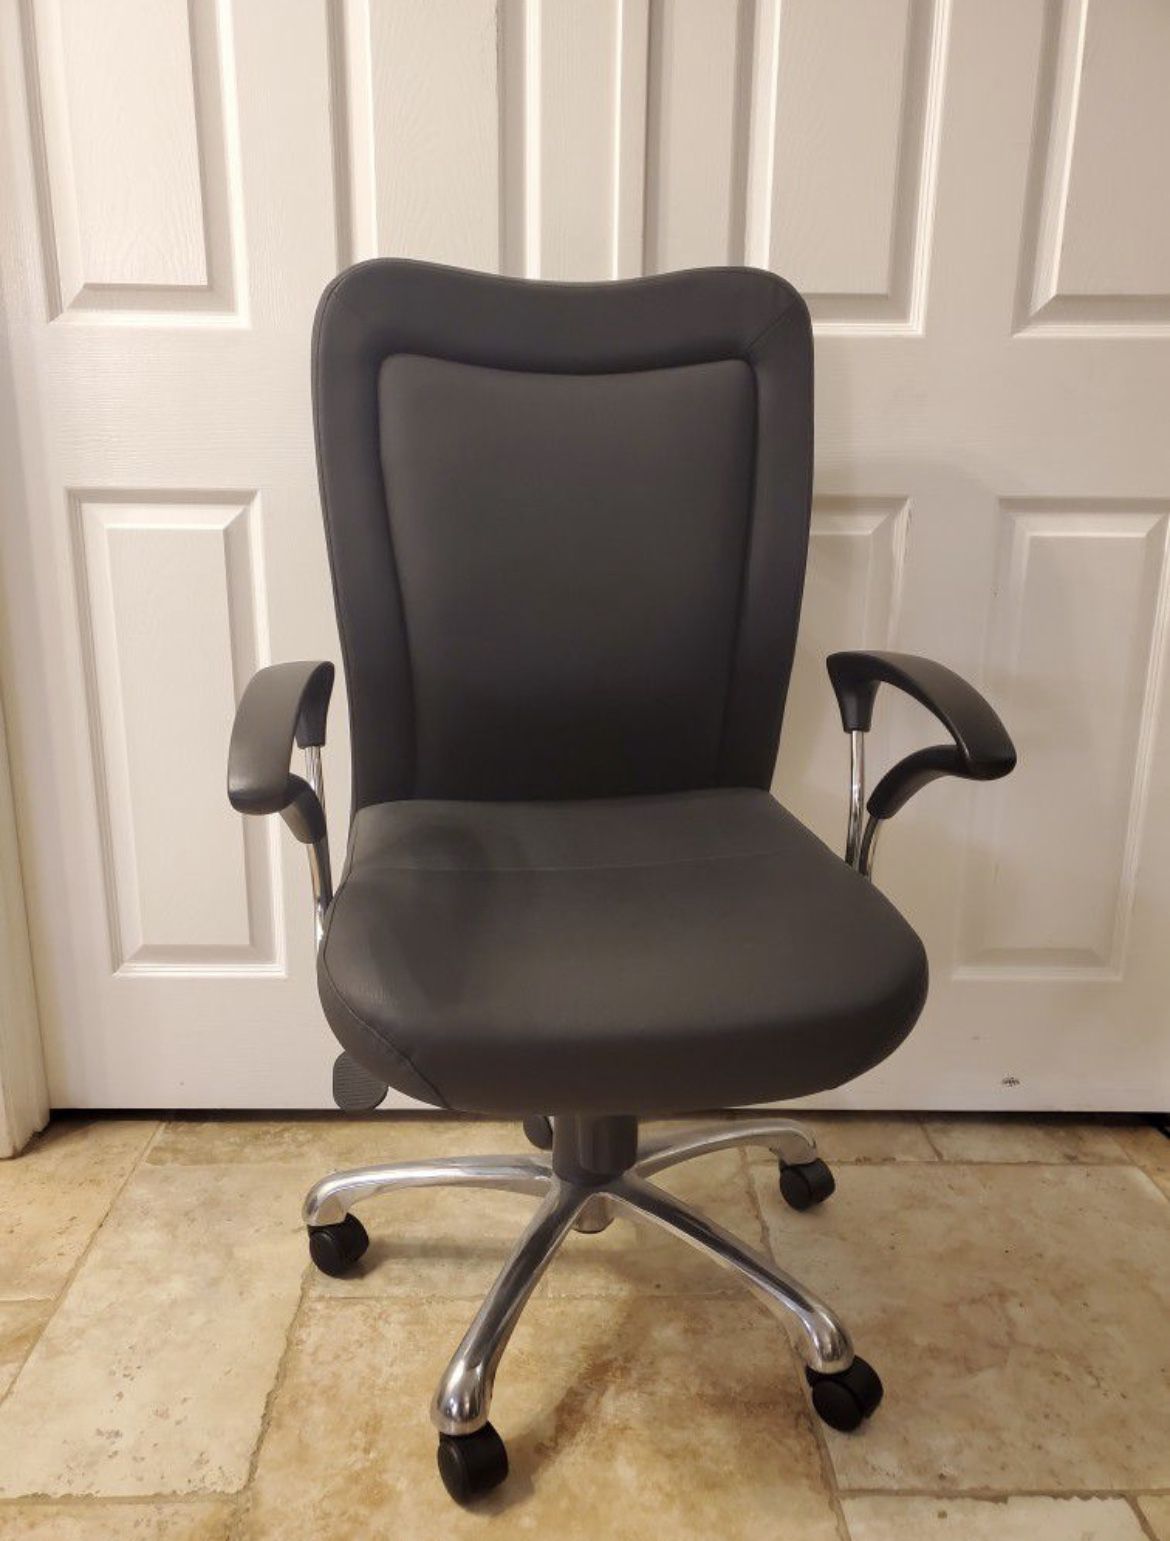 Office Chair in Like New Condition